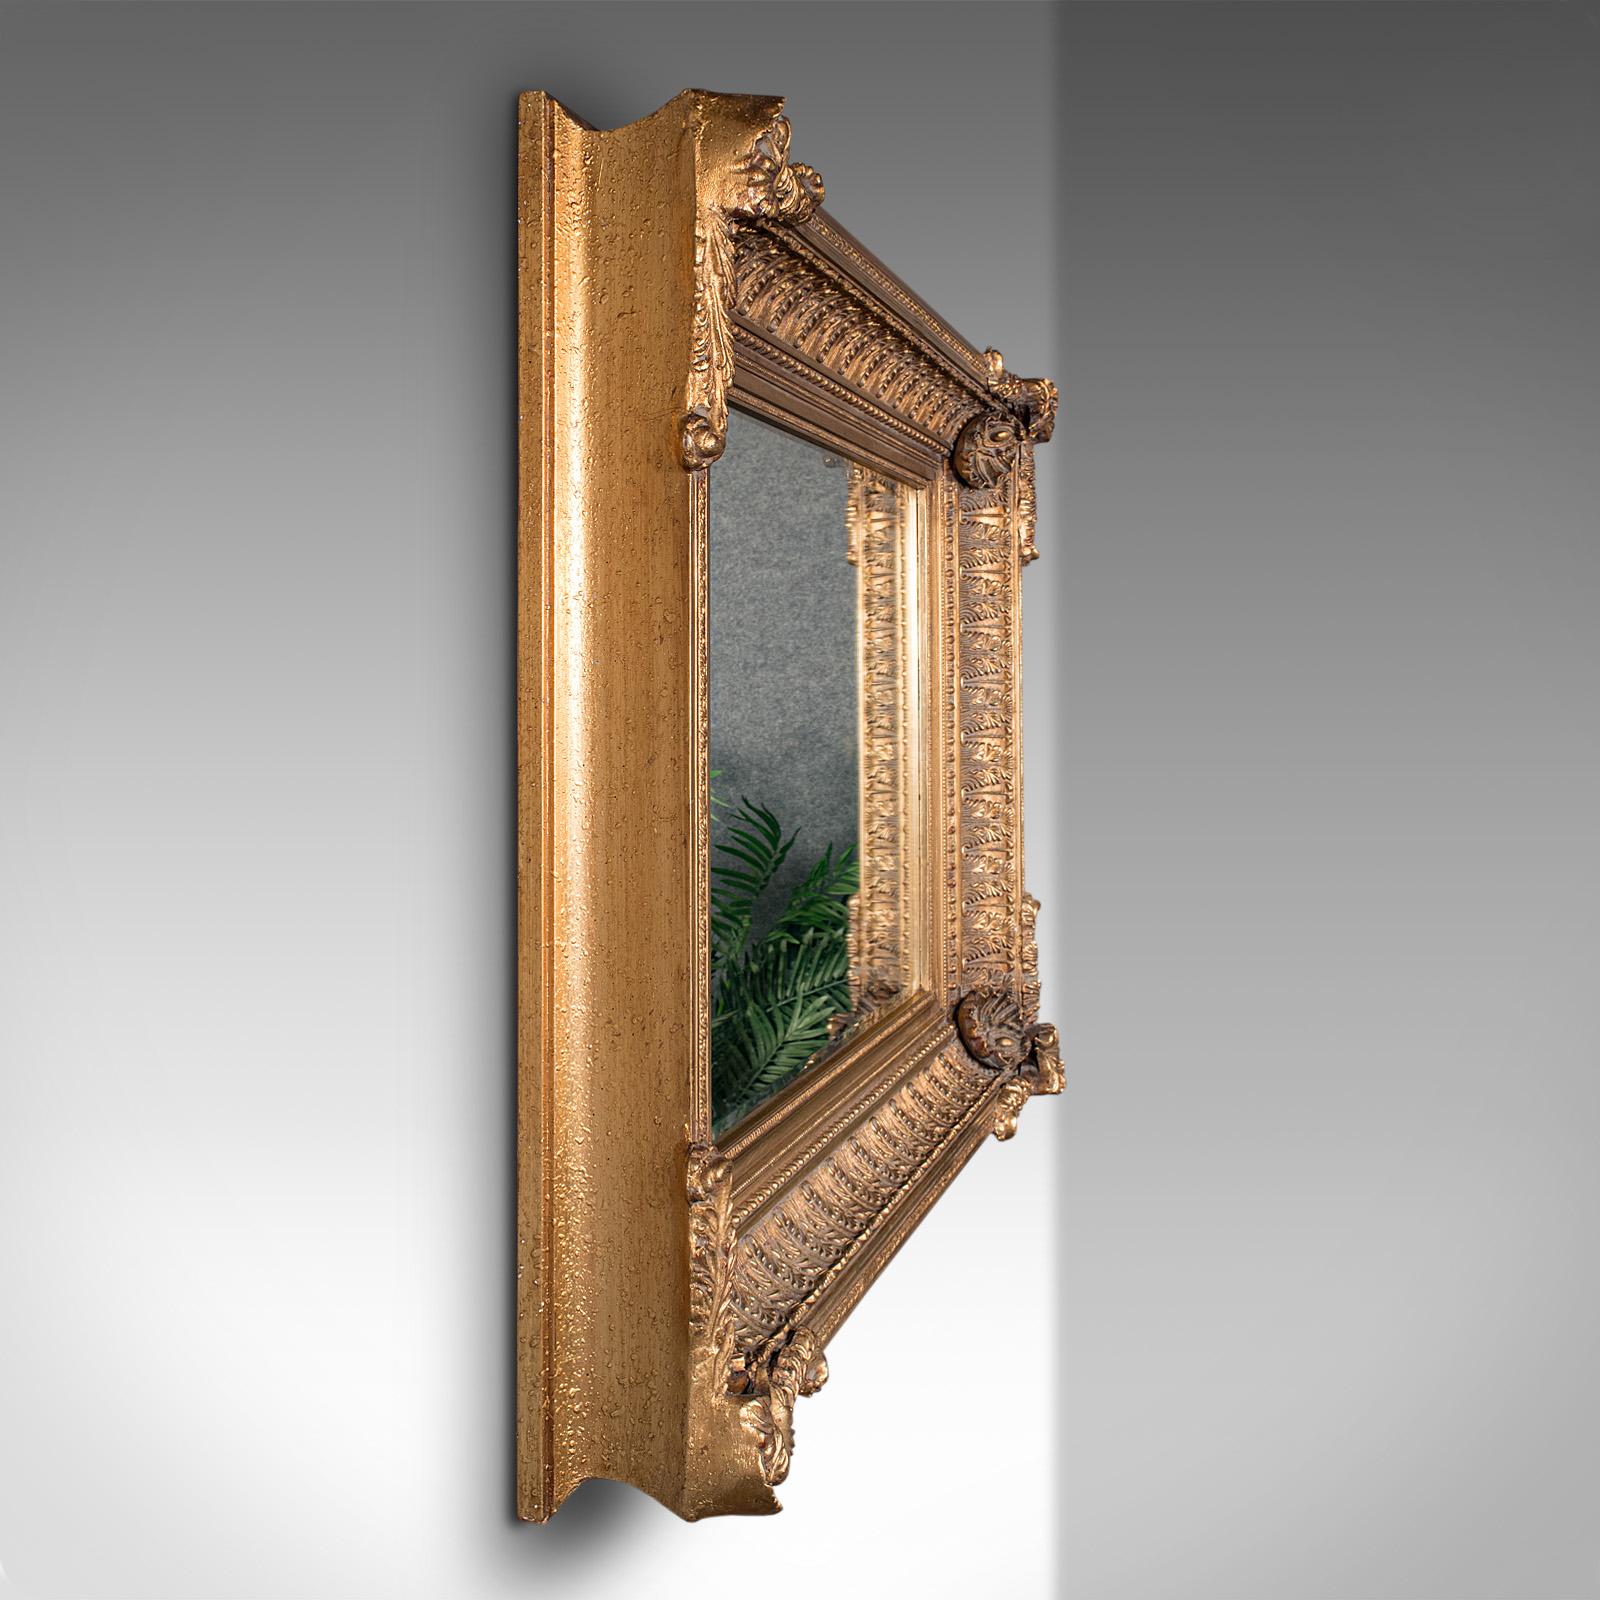 Italian Large Vintage Renaissance Revival Wall Mirror, Continental, Giltwood, Decorative For Sale